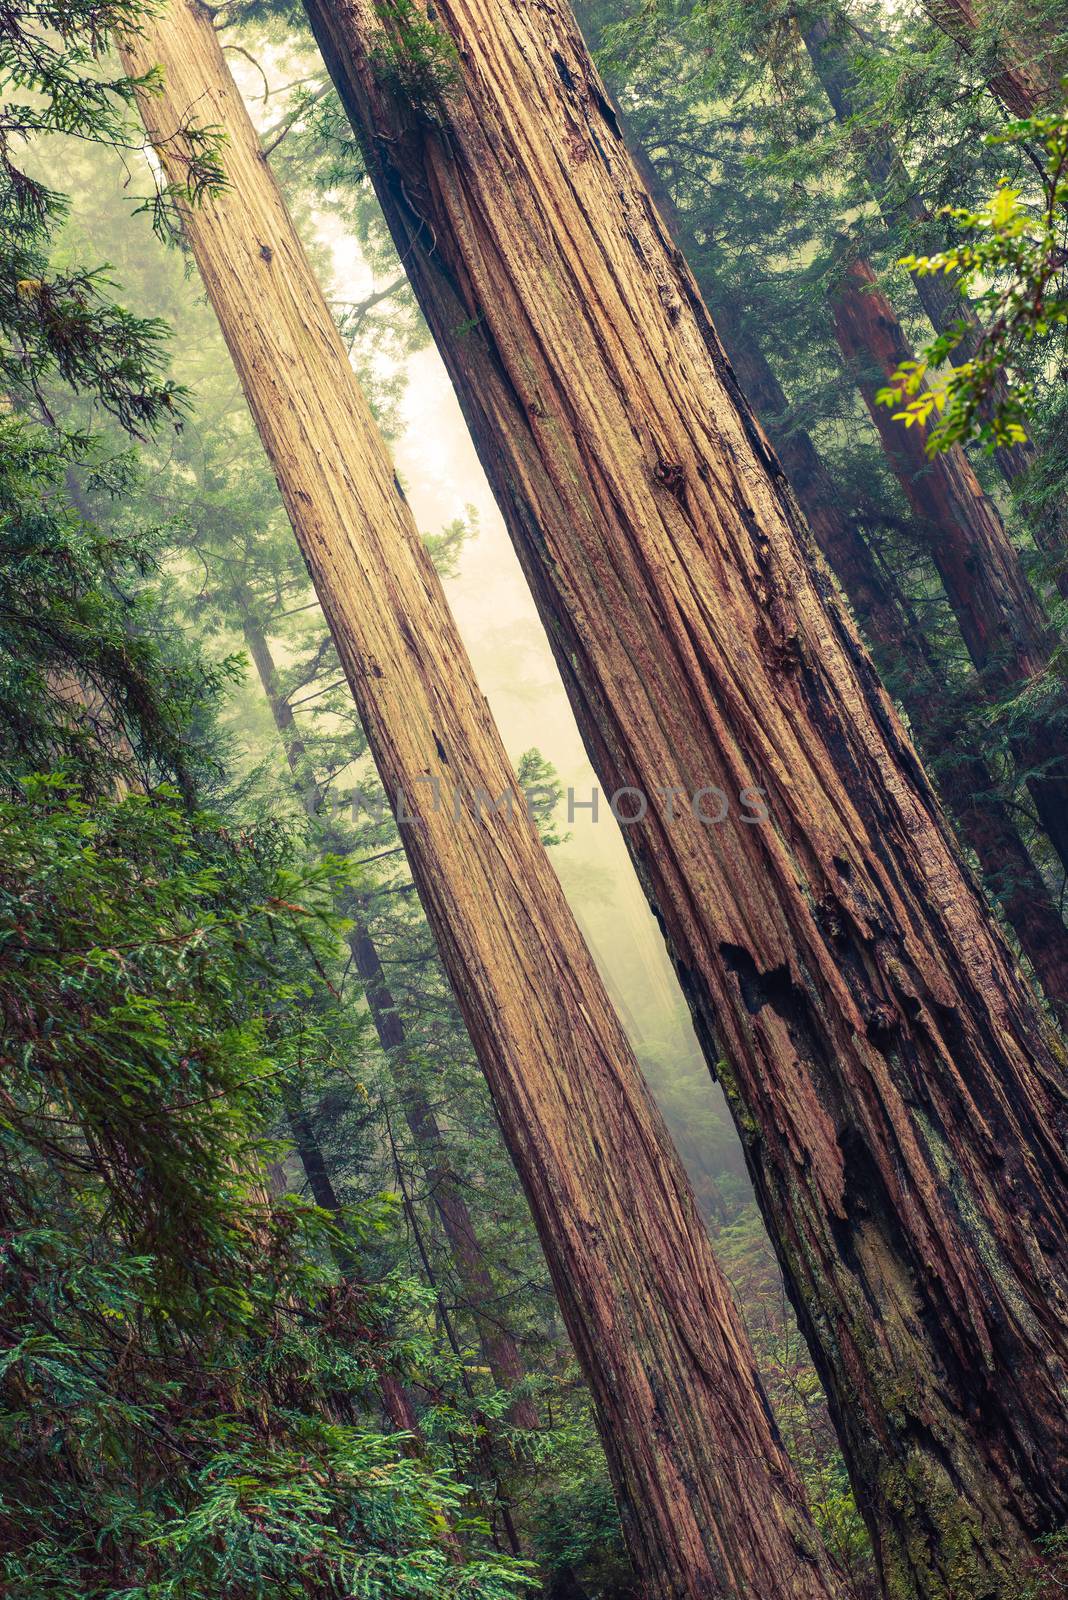 Grand Redwood Trees by welcomia